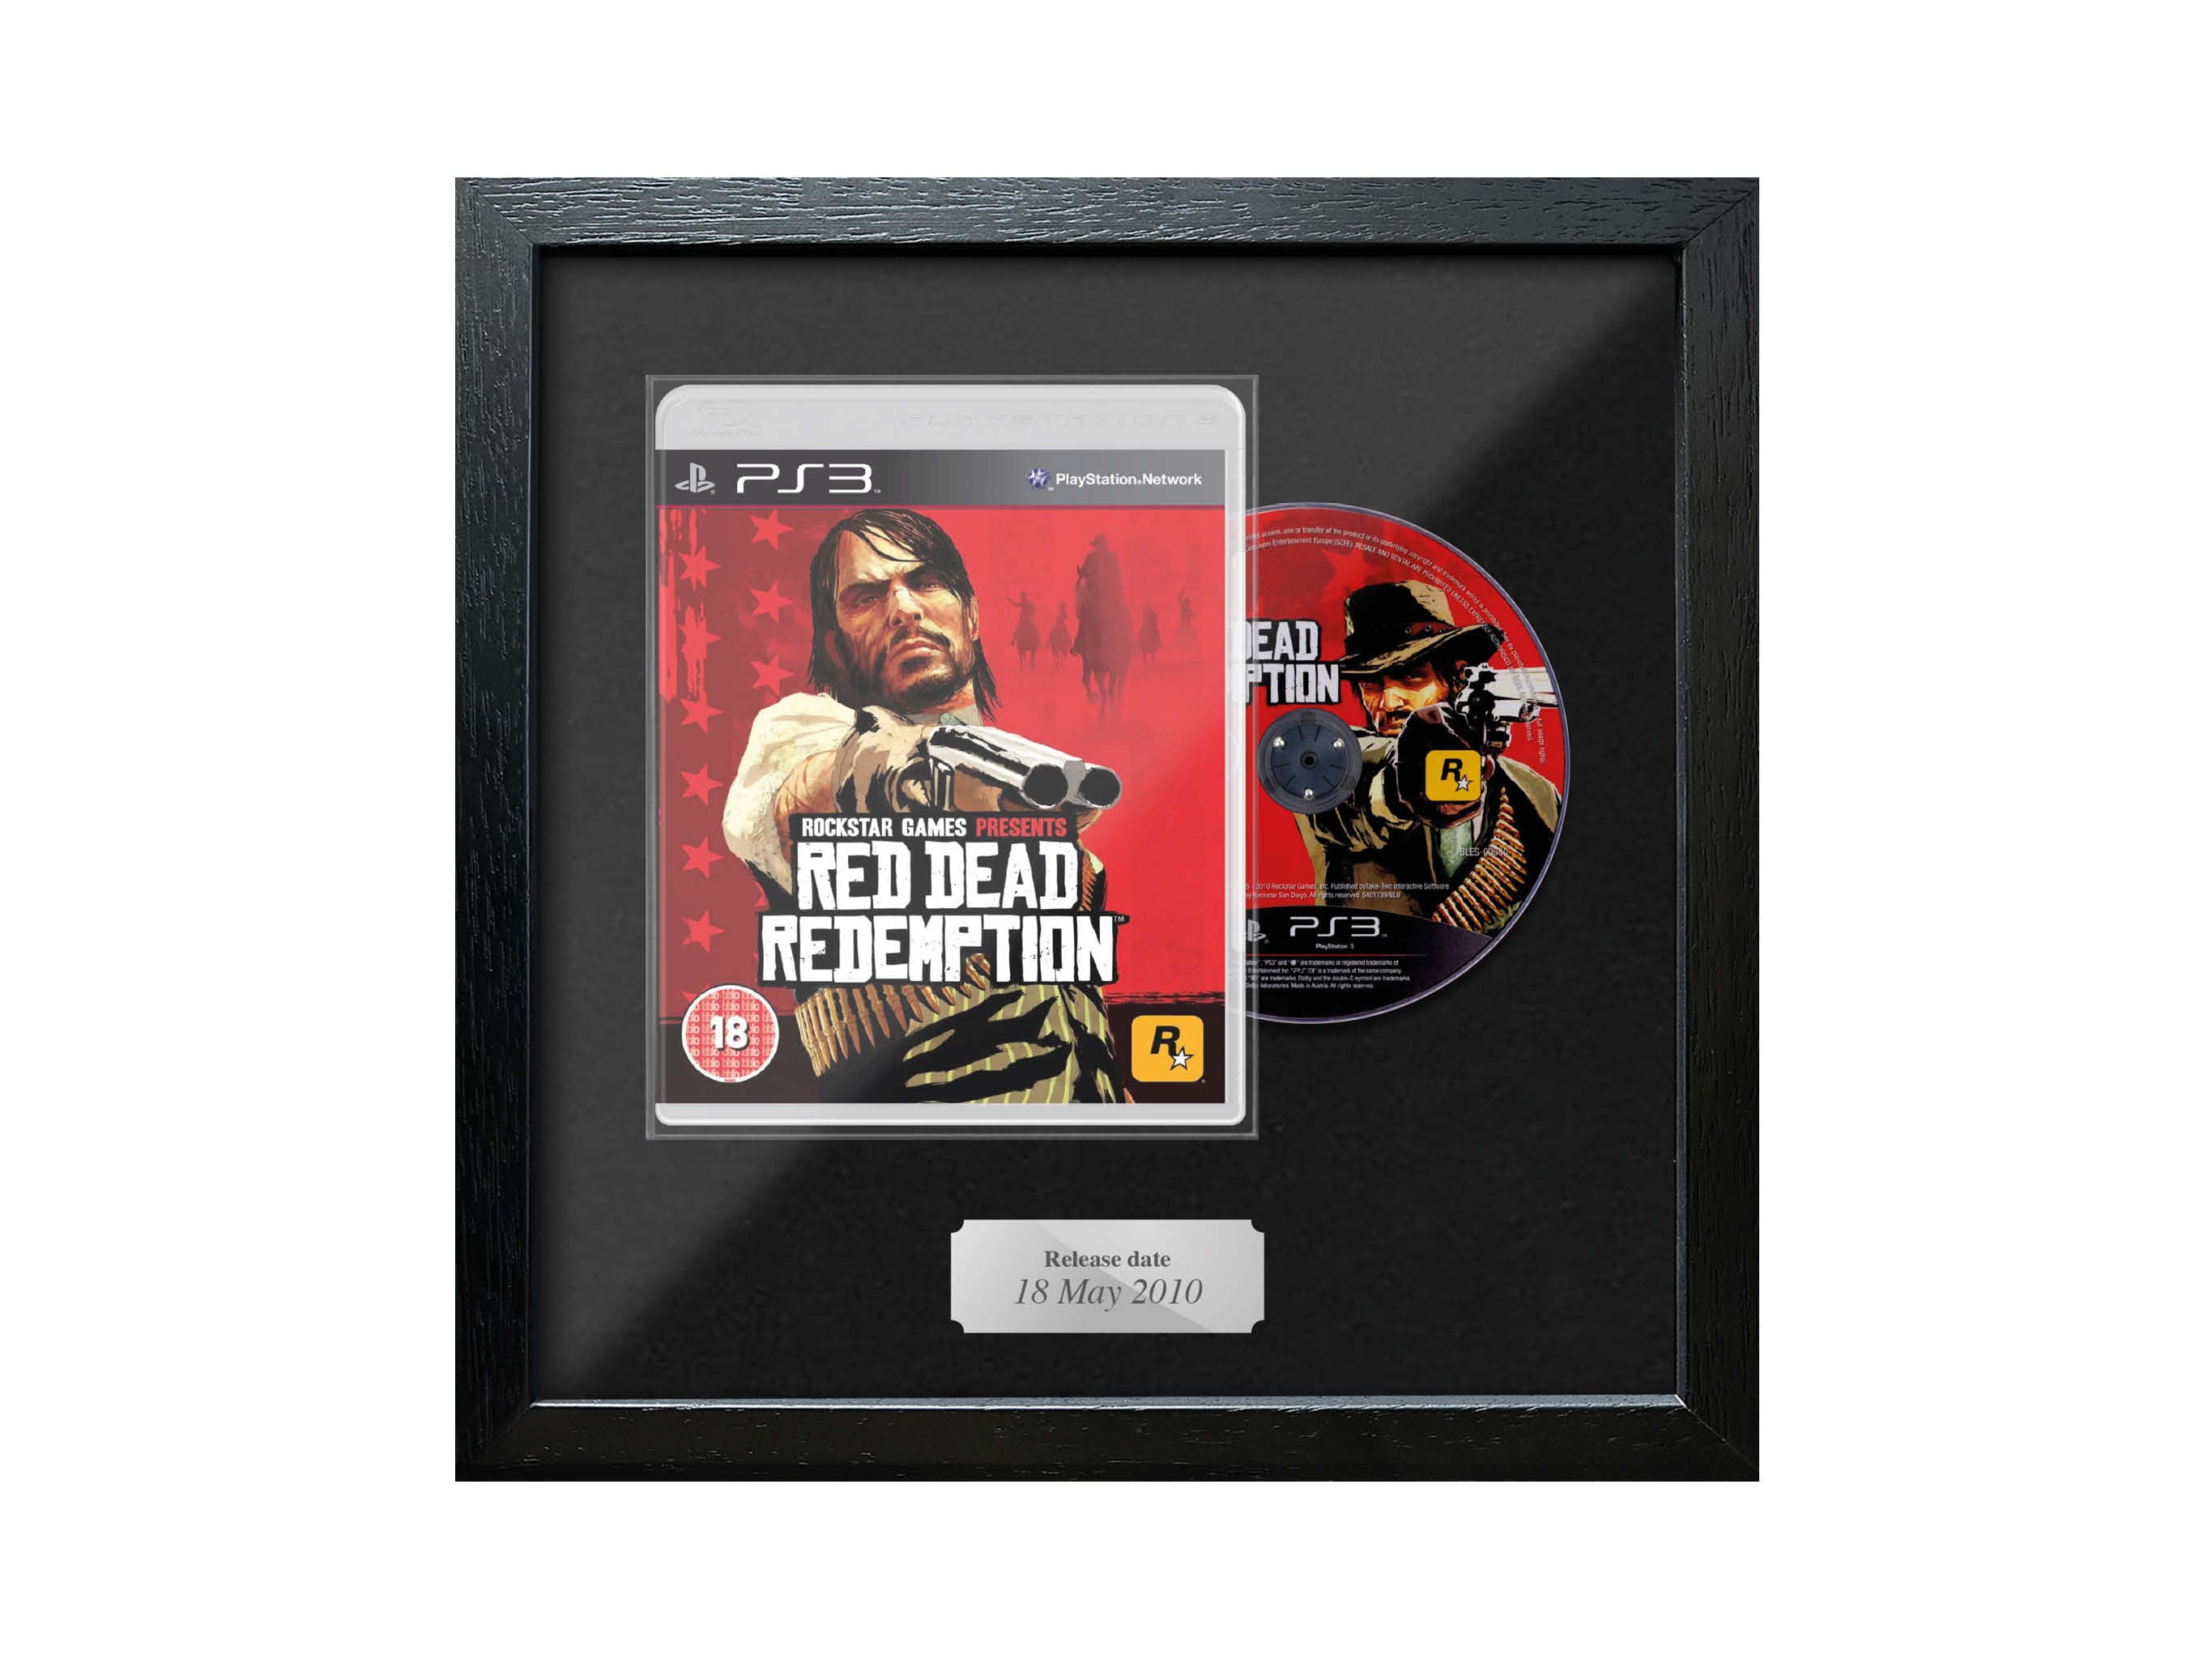 Red Dead Redemption (PS3) New Combined Range Framed Game